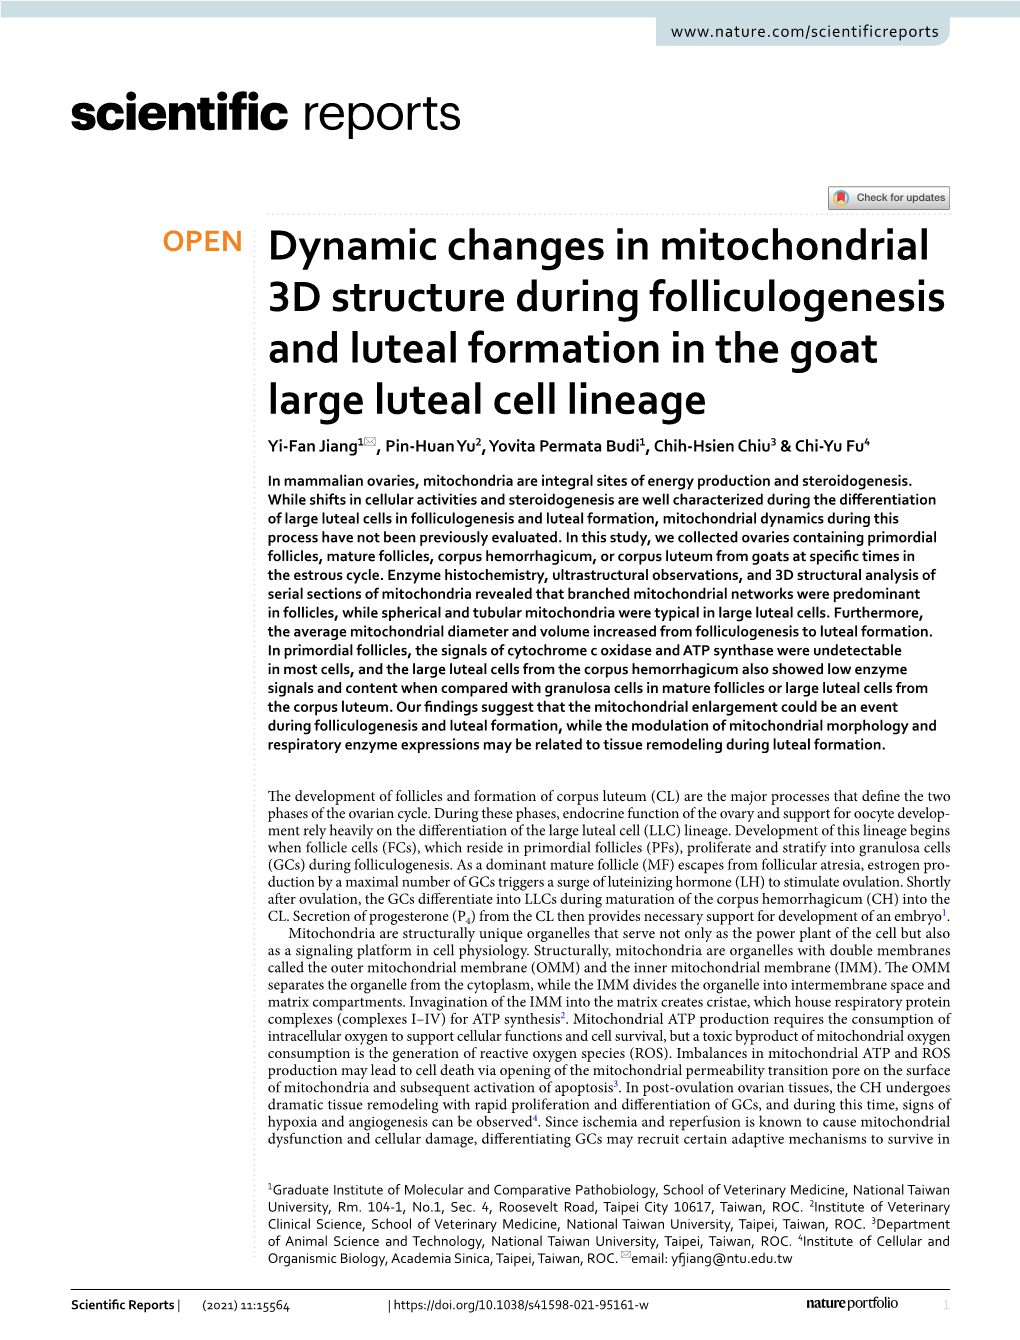 Dynamic Changes in Mitochondrial 3D Structure During Folliculogenesis